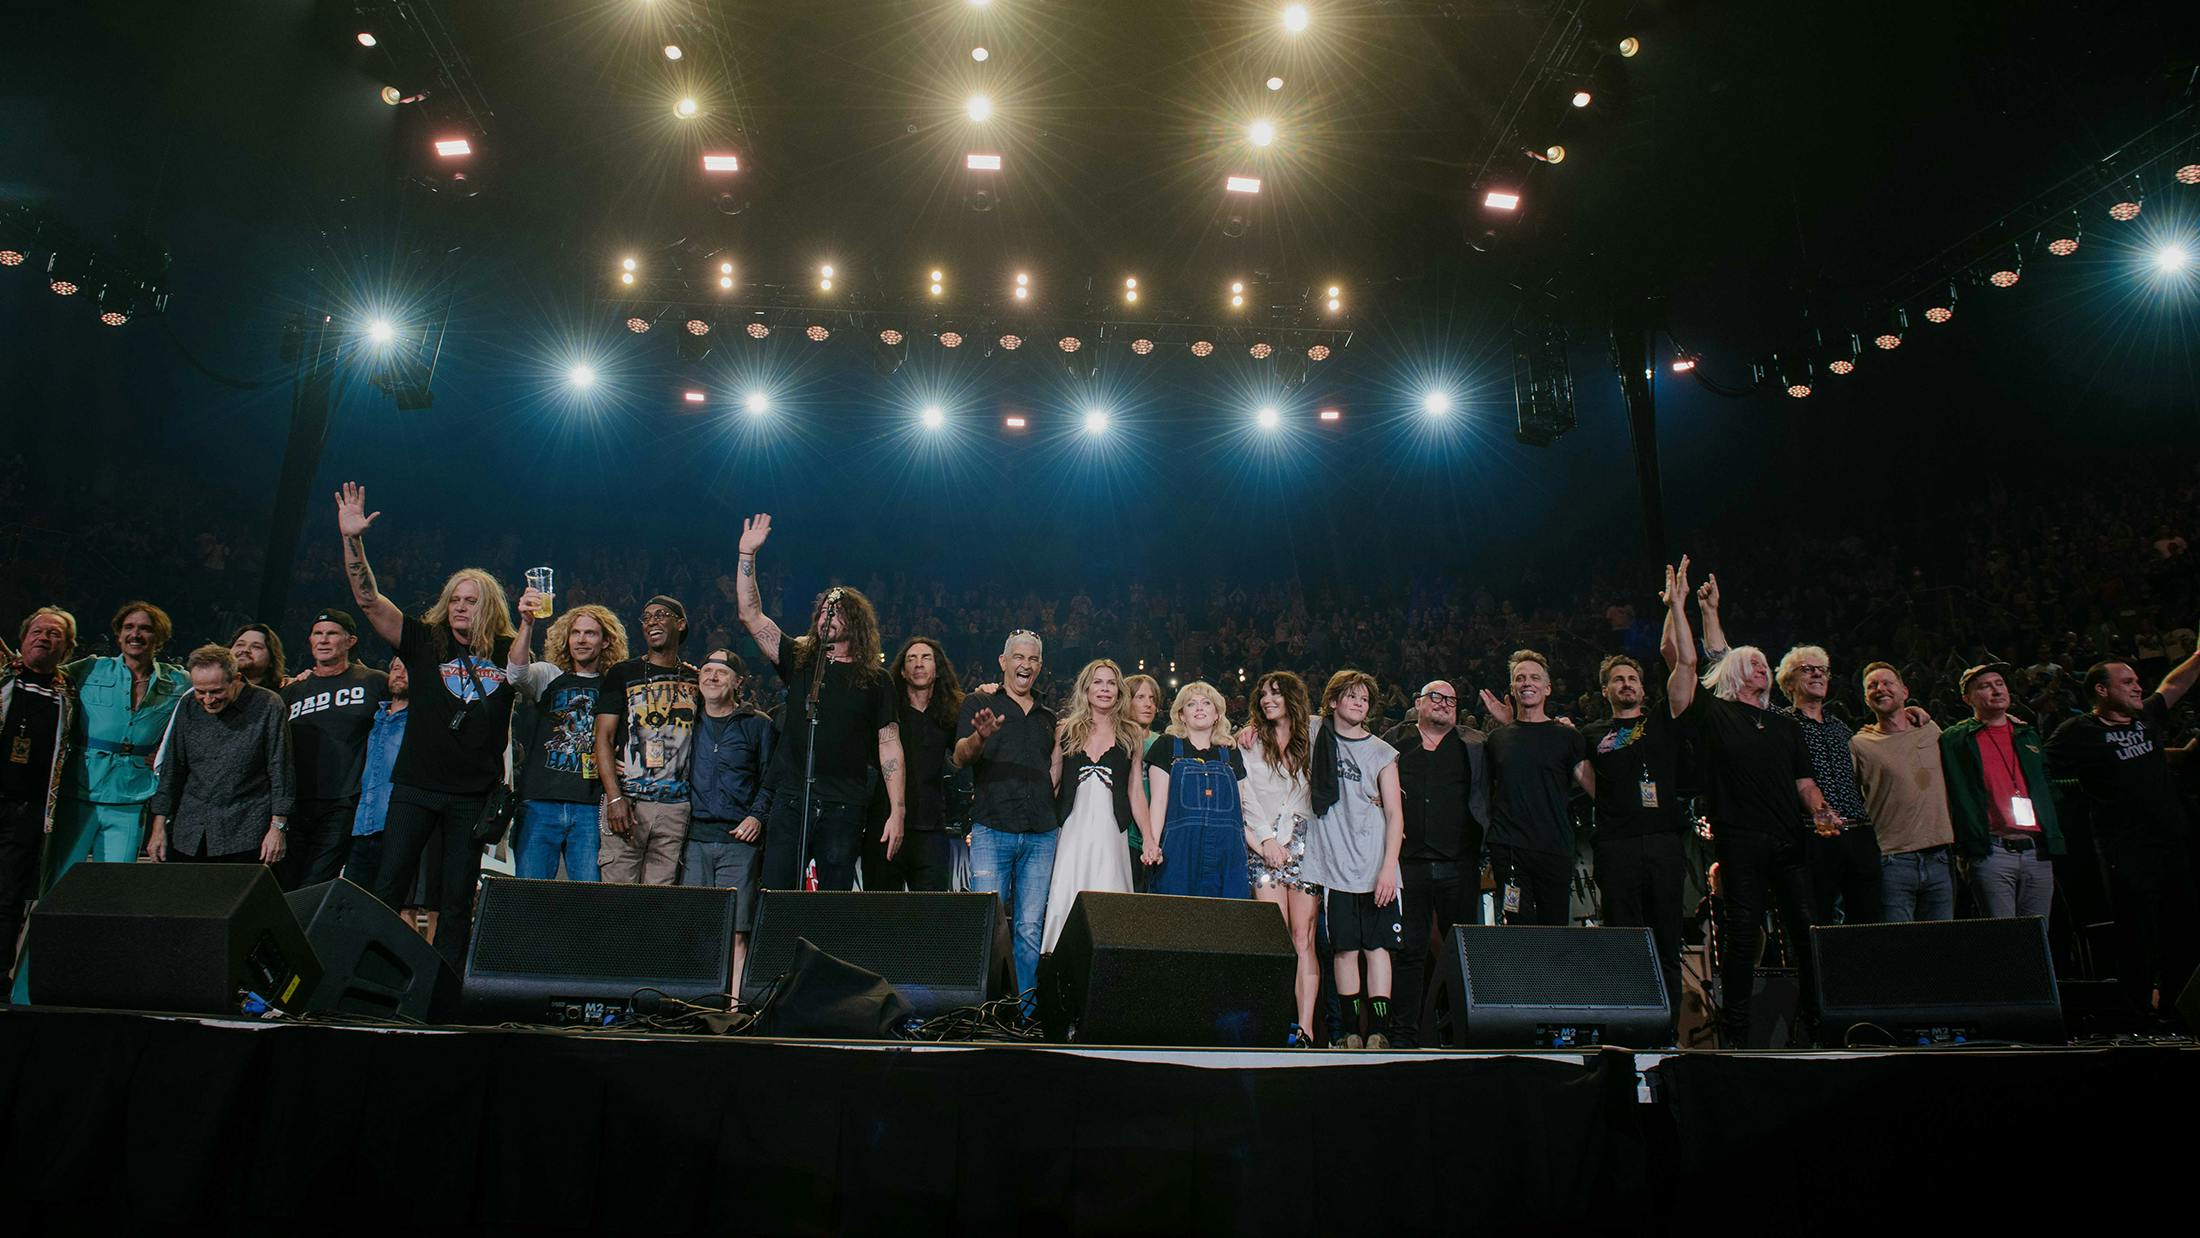 In pictures: The Taylor Hawkins Tribute Concert in Los Angeles